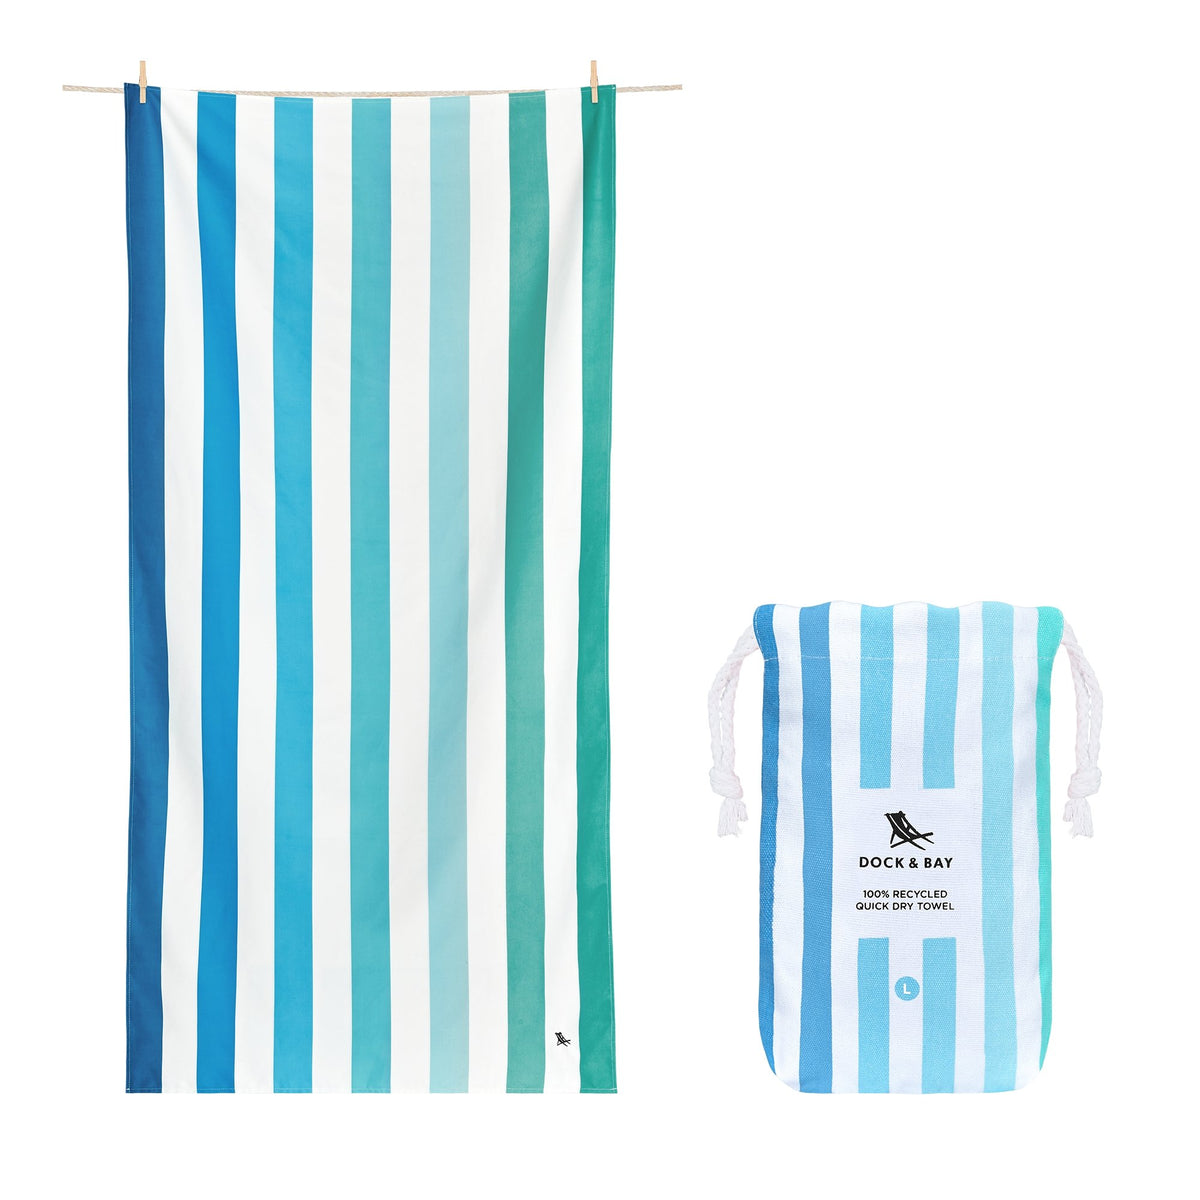 Dock and Bay Quick Dry Towel - Endless River - The Mewstone Candle Co